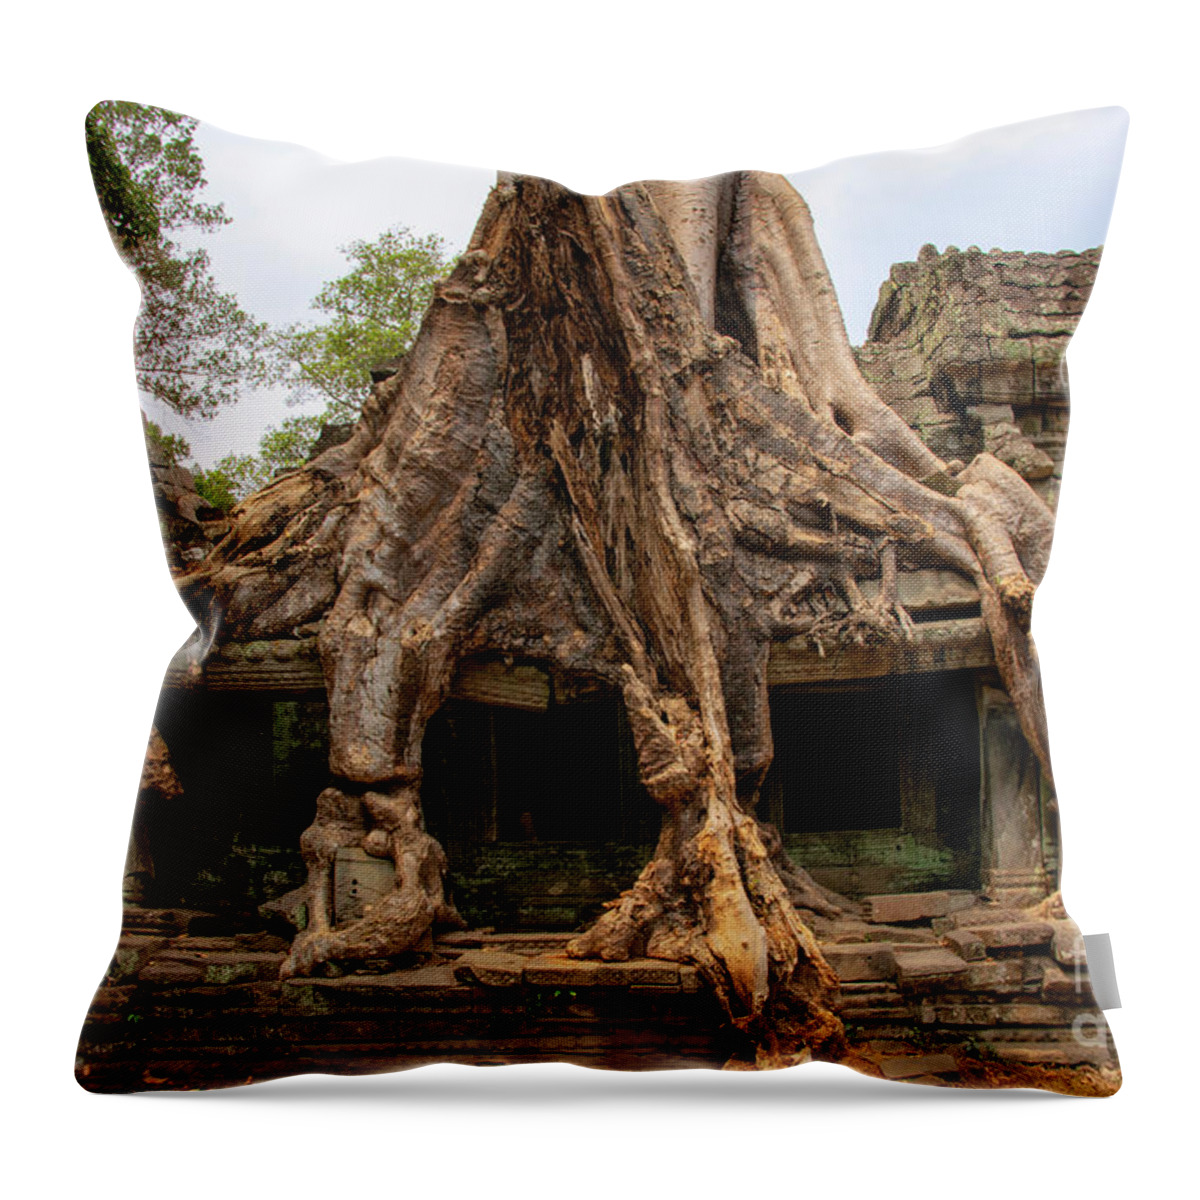 Preah Khan Temple Throw Pillow featuring the photograph Massive Tree Roots at Preah Khan Temple by Bob Phillips